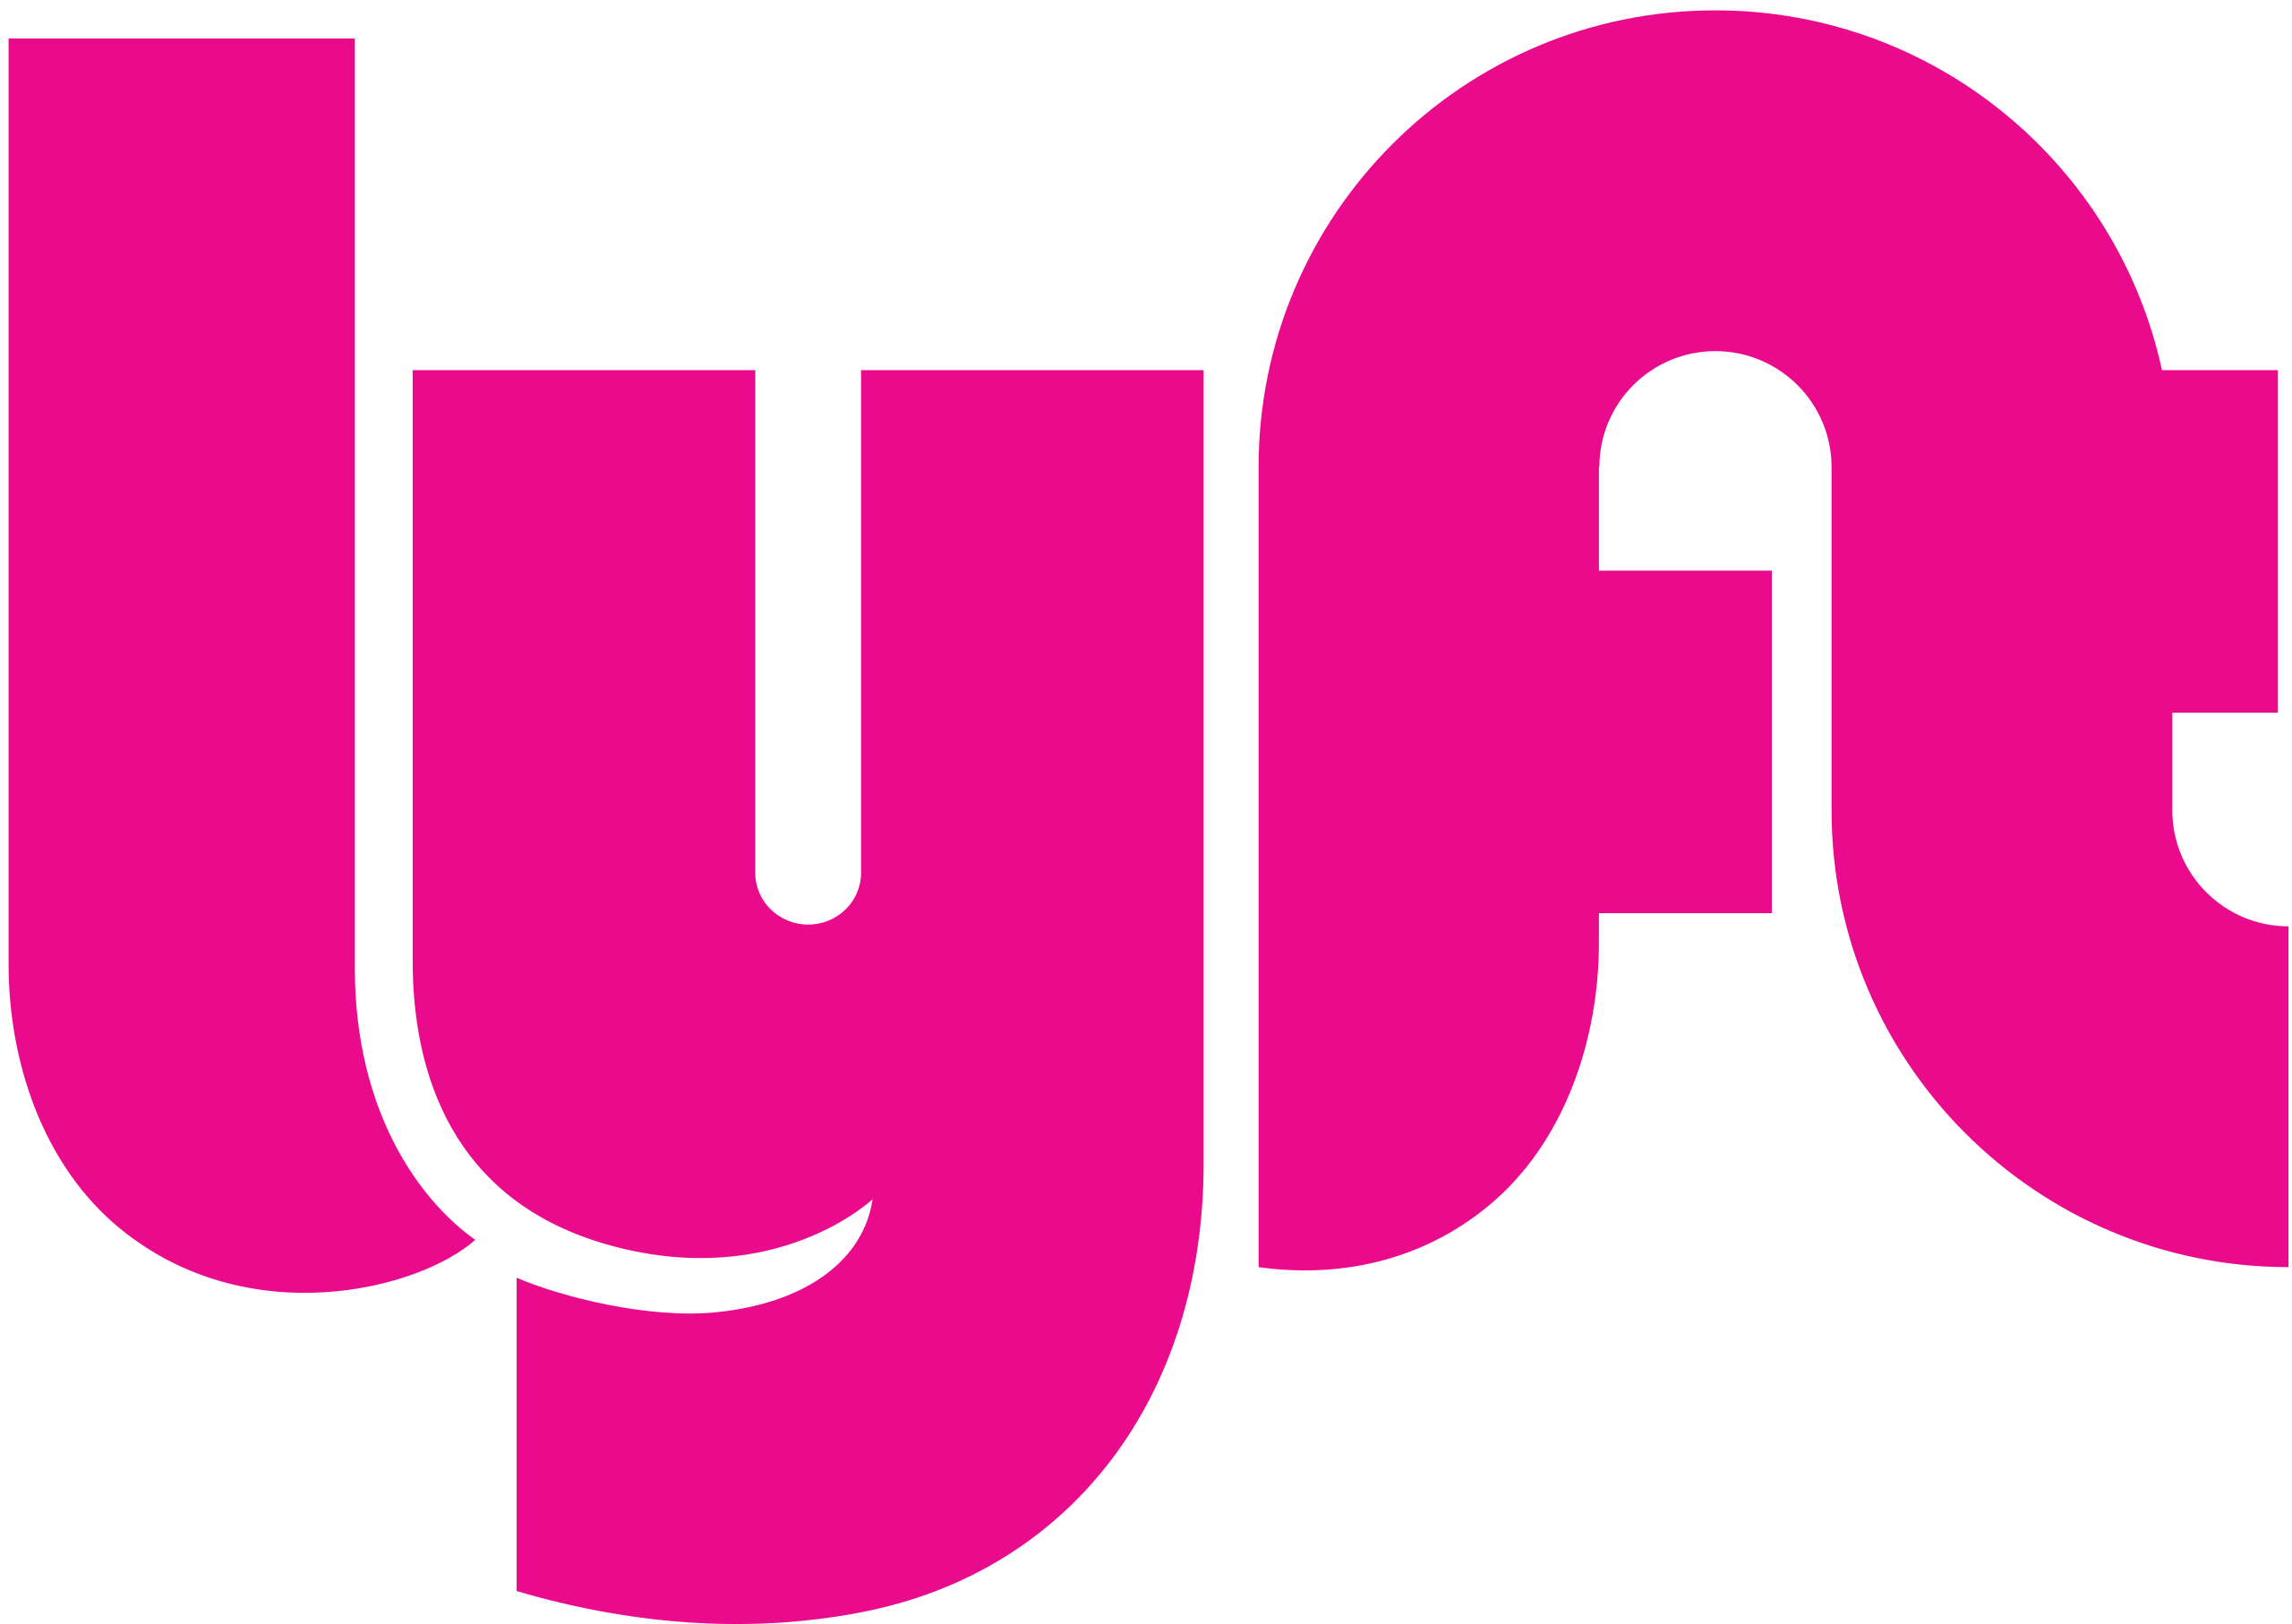 A pink and black logo for lyft.